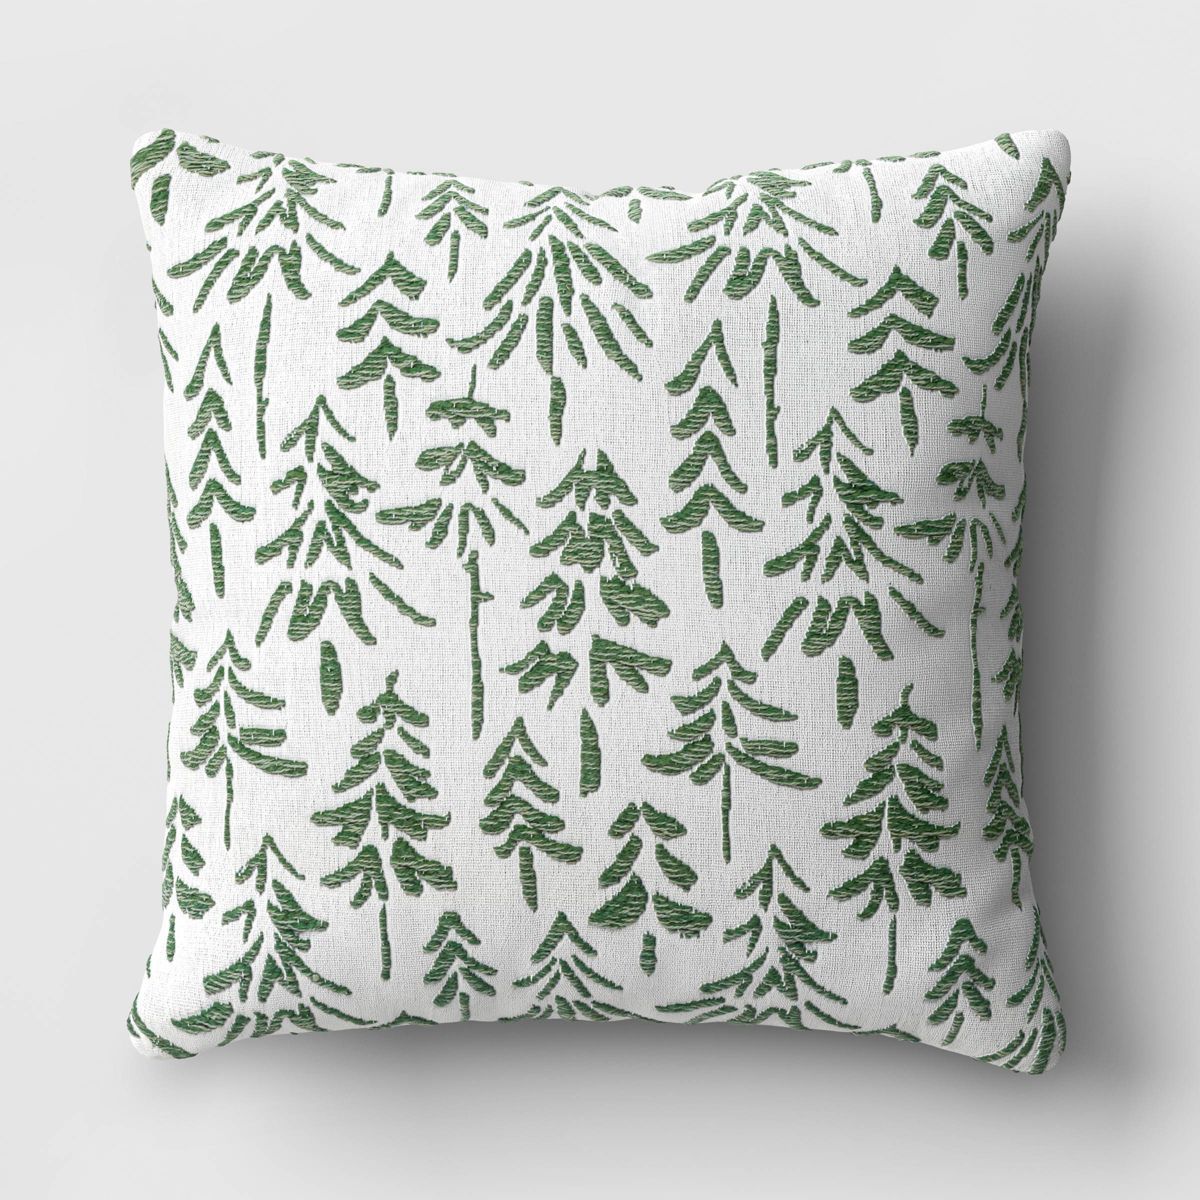 Woven Trees Square Throw Pillow - Threshold™ | Target